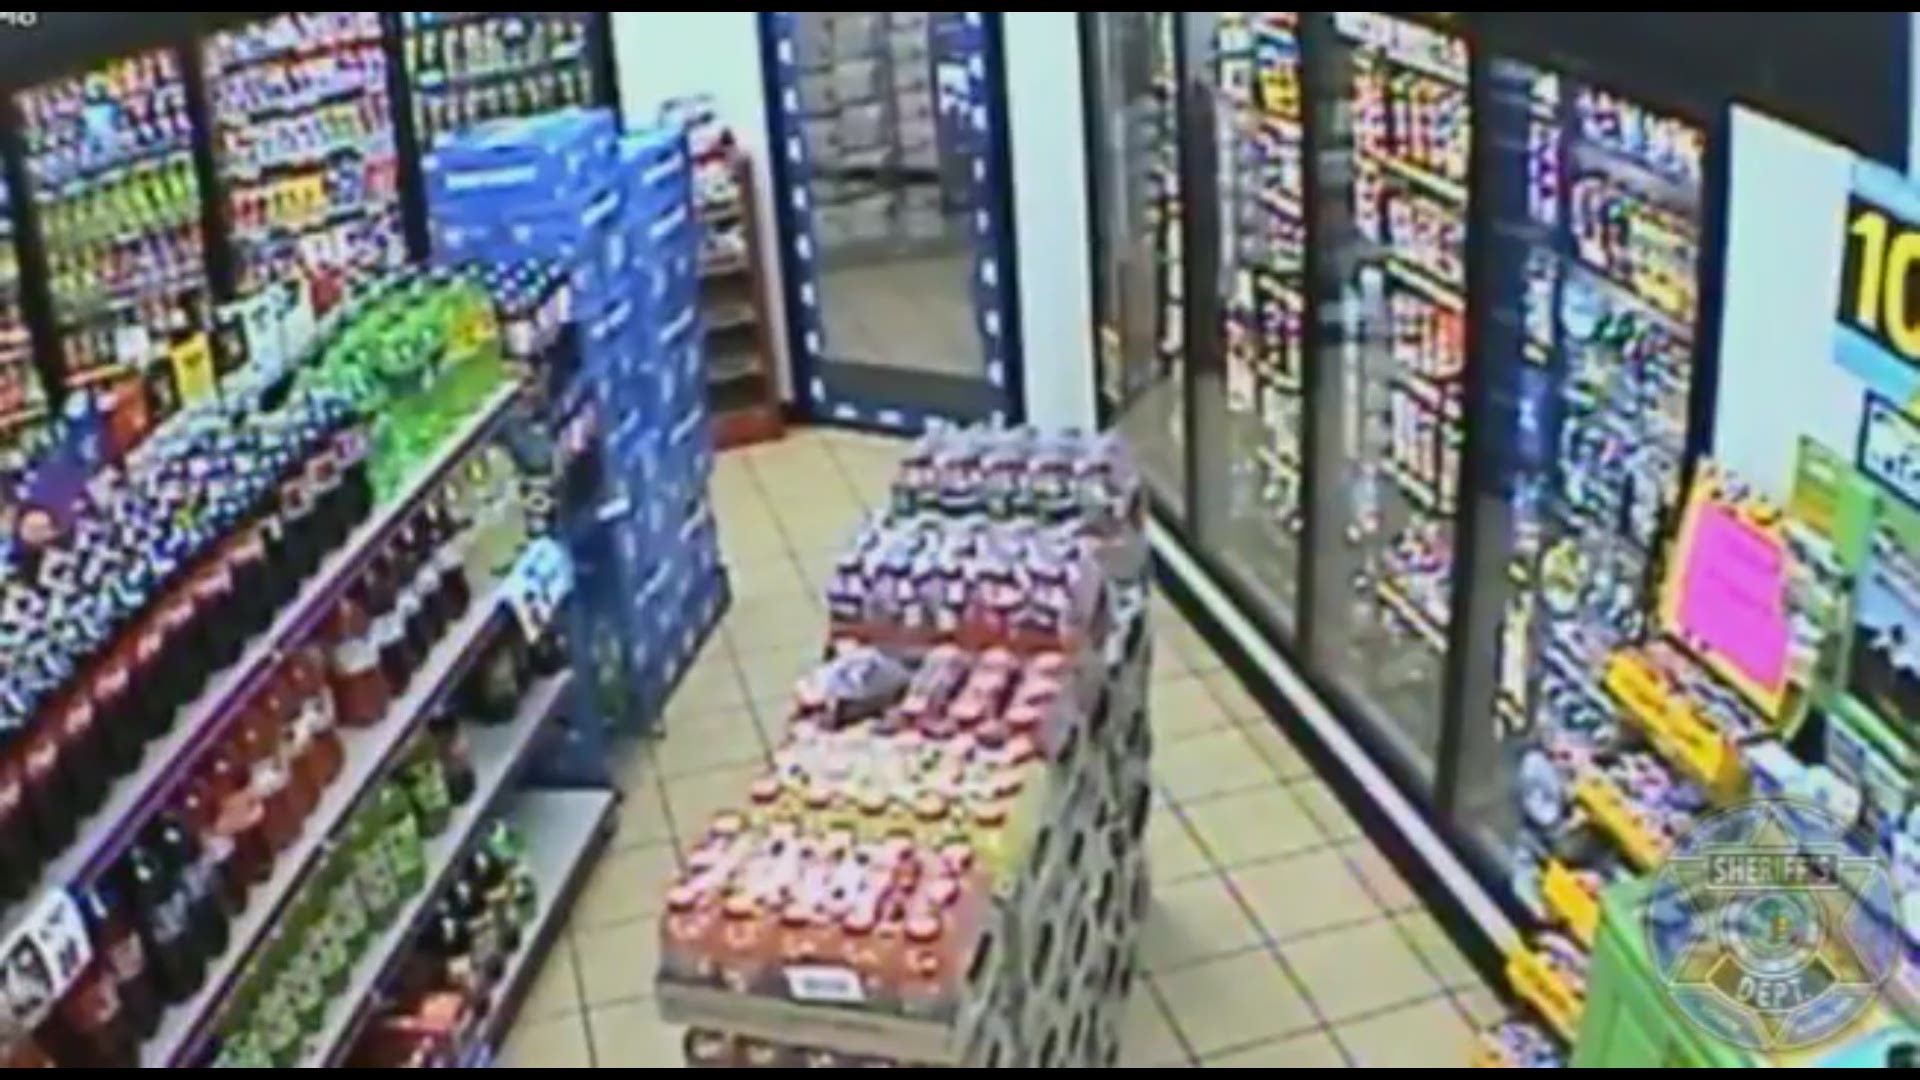 This surveillance video shows a man who deputies say stole two cases of beer from a Lexington County gas station.